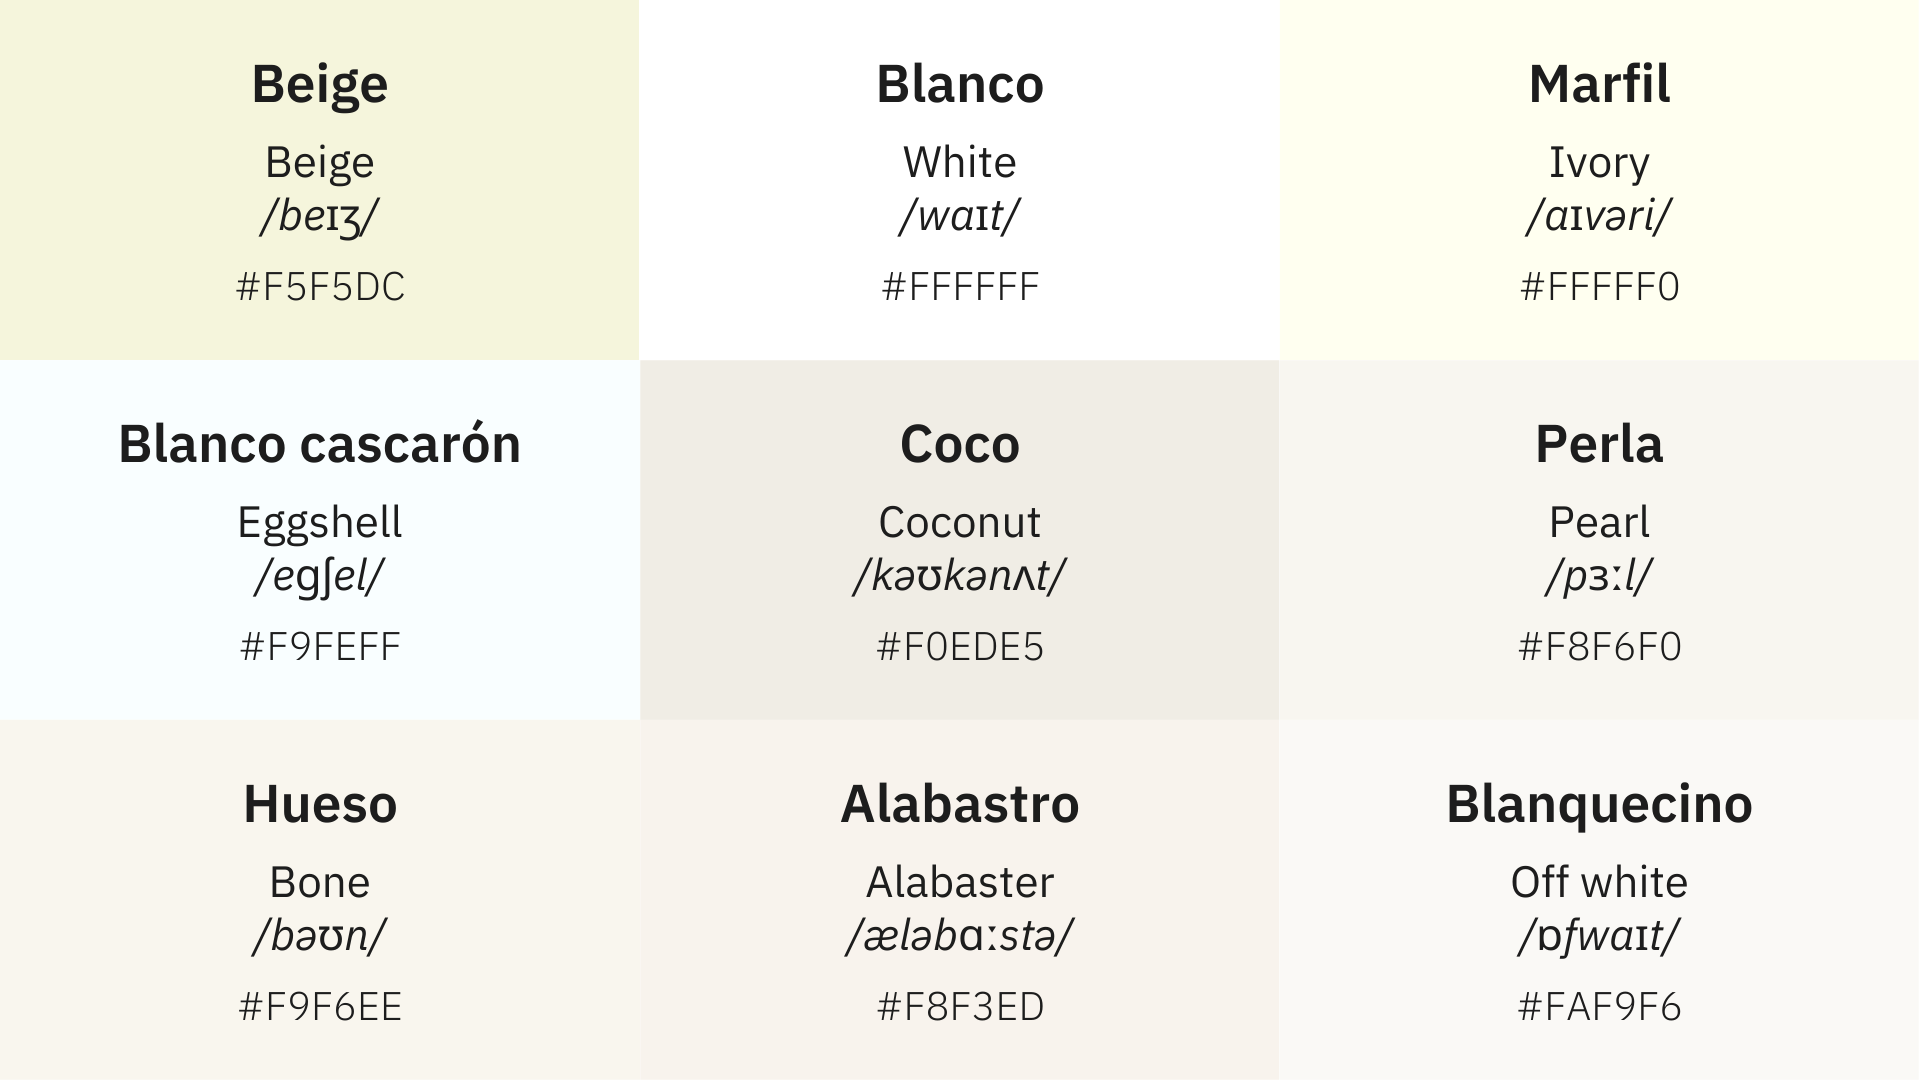 Pretty shades of White colors in English from off white to ivory